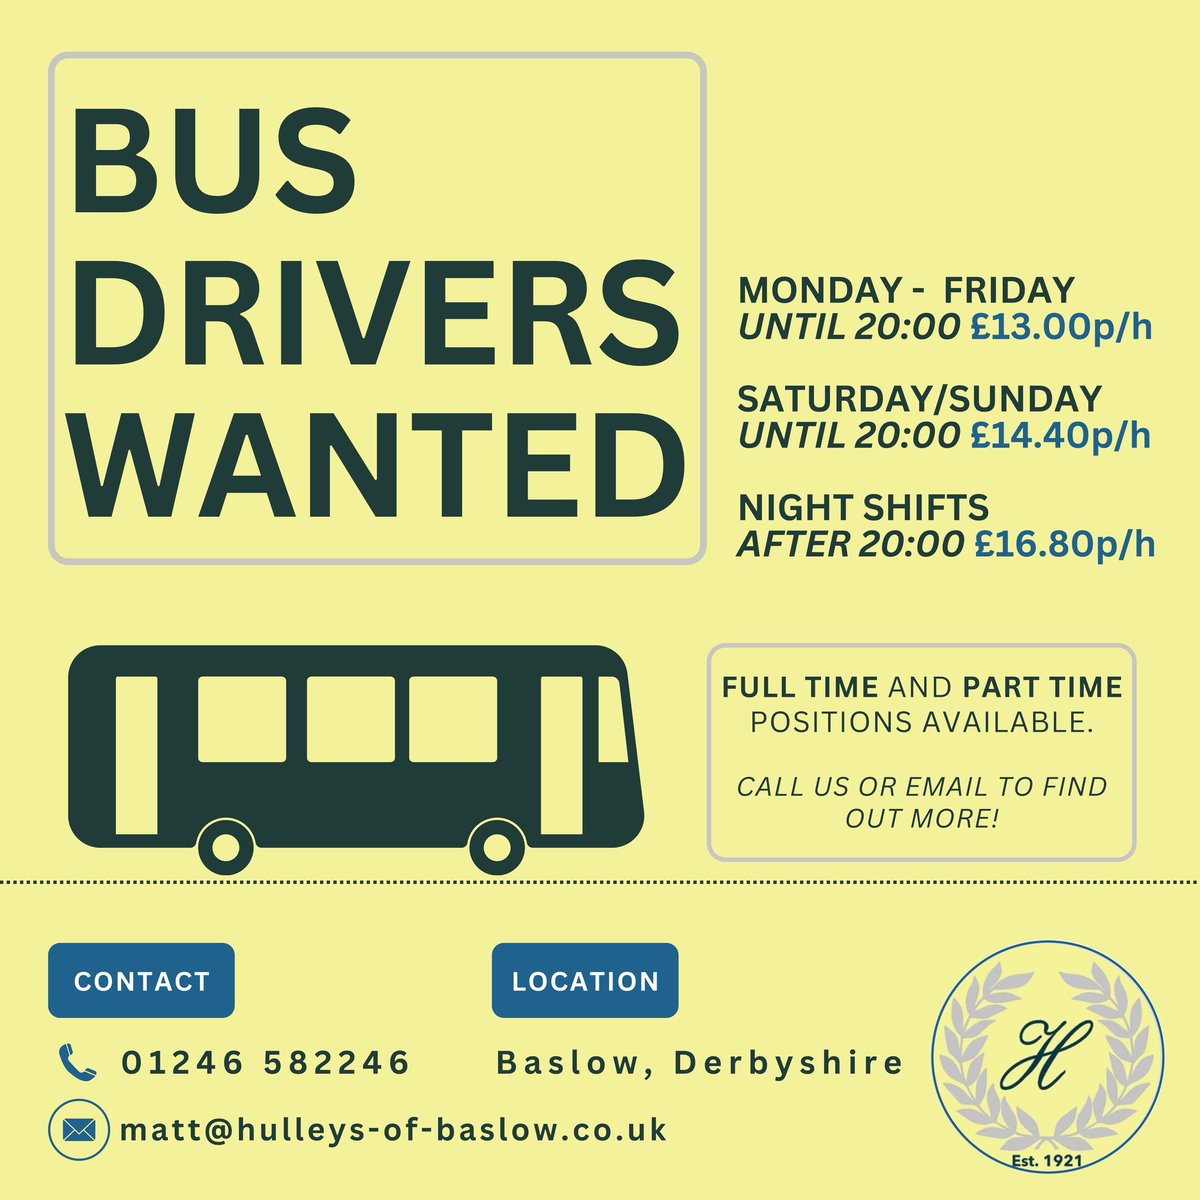 Would you like to drive in the beautiful Peak District and surrounding areas? 🌳 🚍 

We’re looking for reliable, friendly, and punctual bus drivers to join our friendly team in Baslow…

Contact us now for further information. 
01246 582246

#derbyshirejobs
#hulleysofbaslow